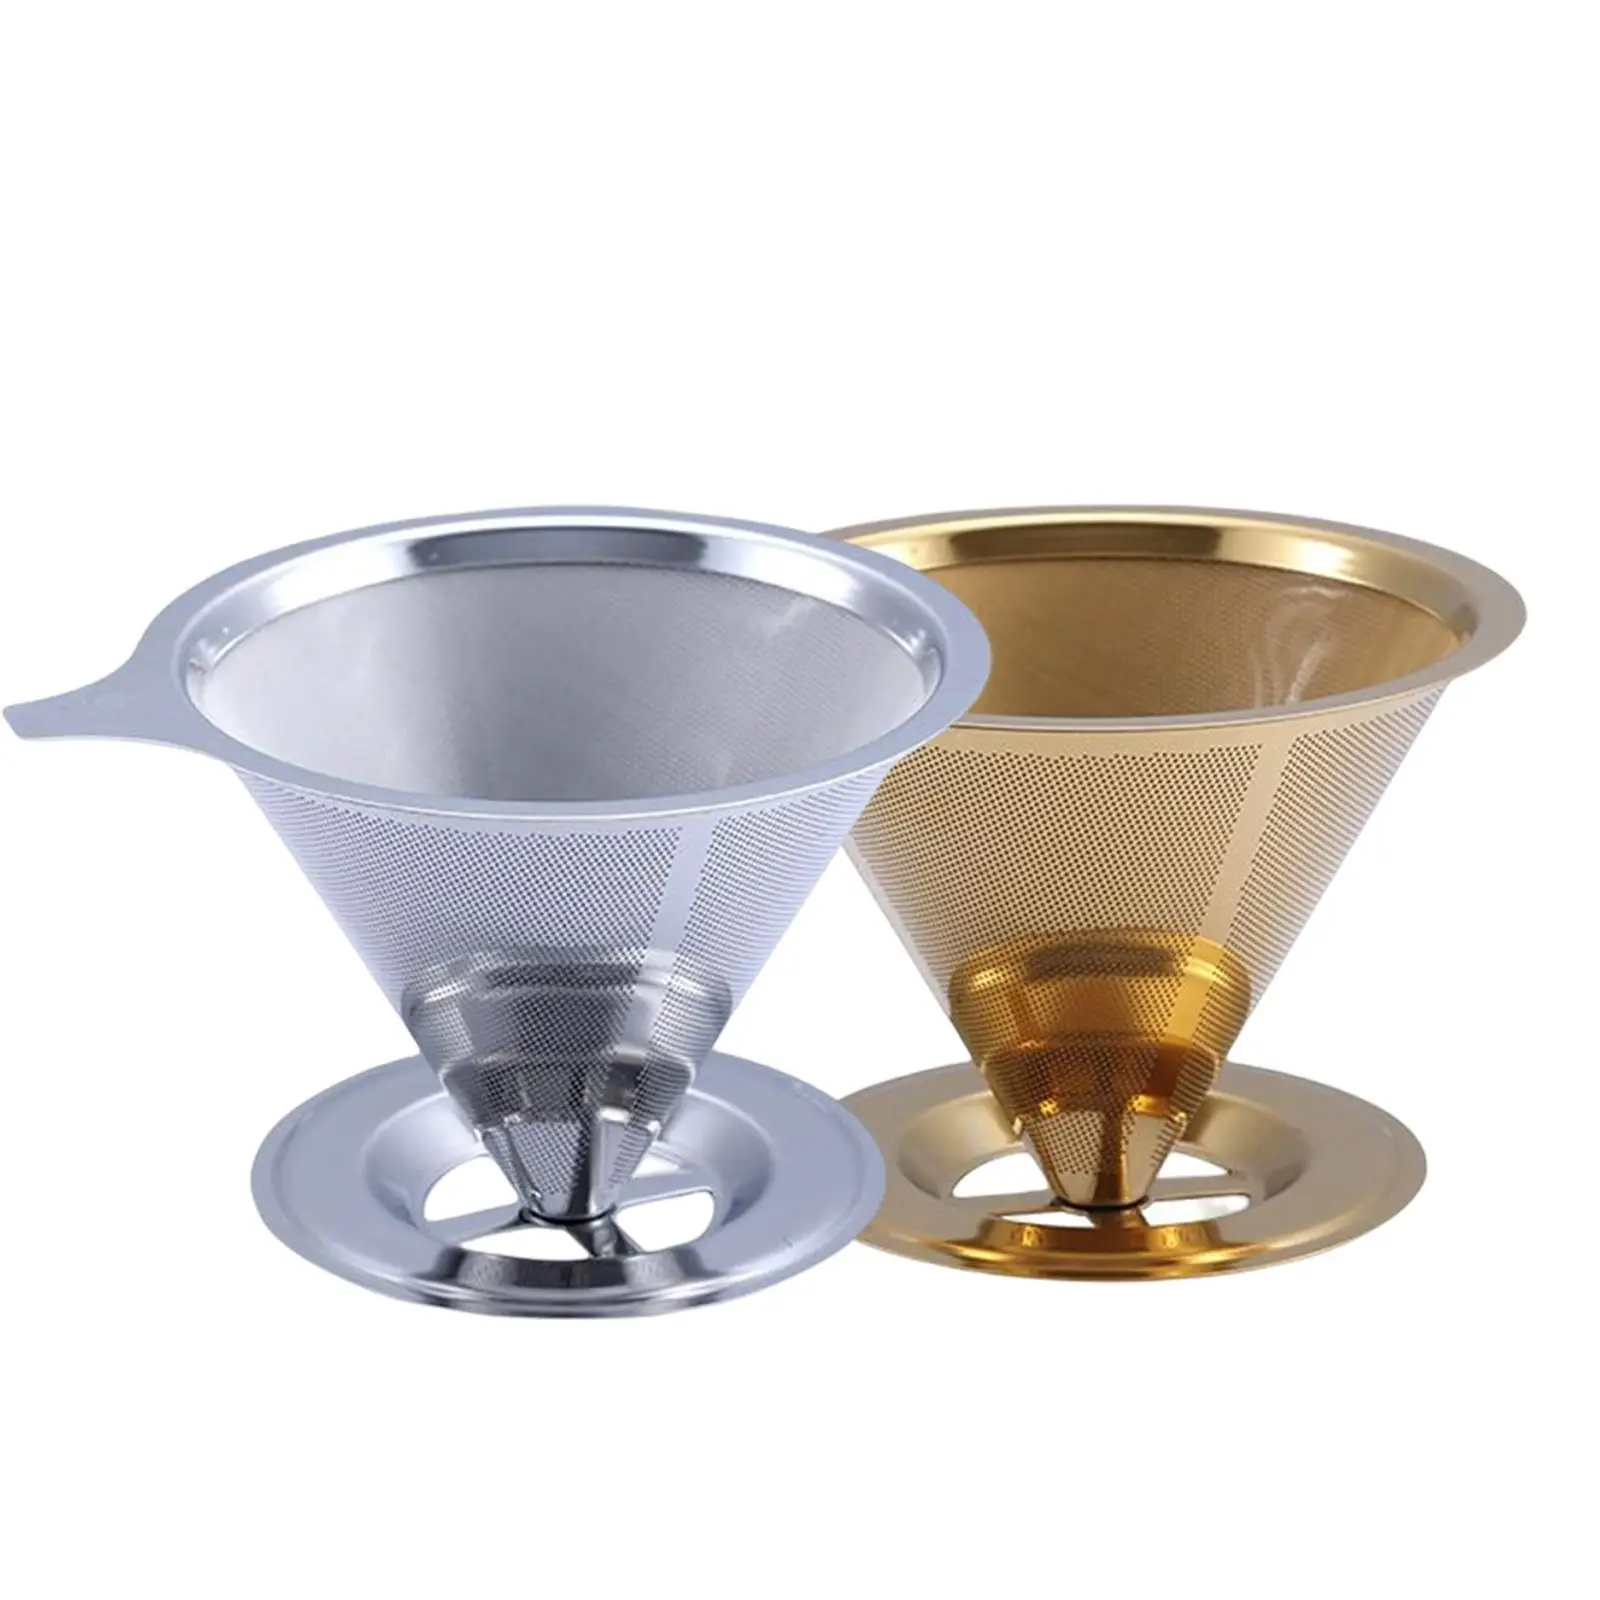 Stainless Steel Coffee Filter for Manual Coffee Maker Permanent Coffee Filter